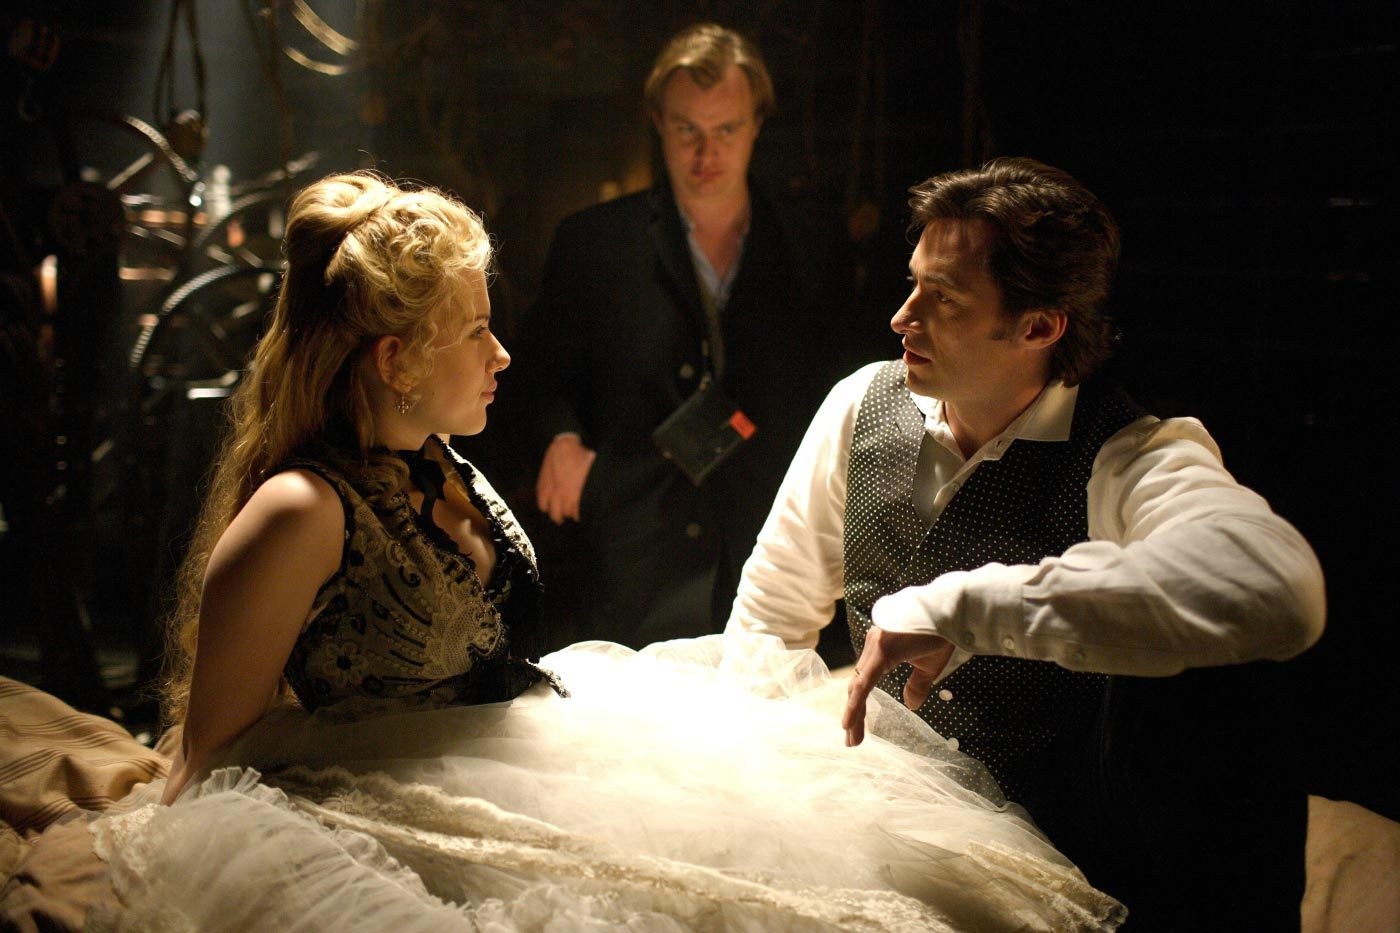 Behind the Scenes of The Prestige